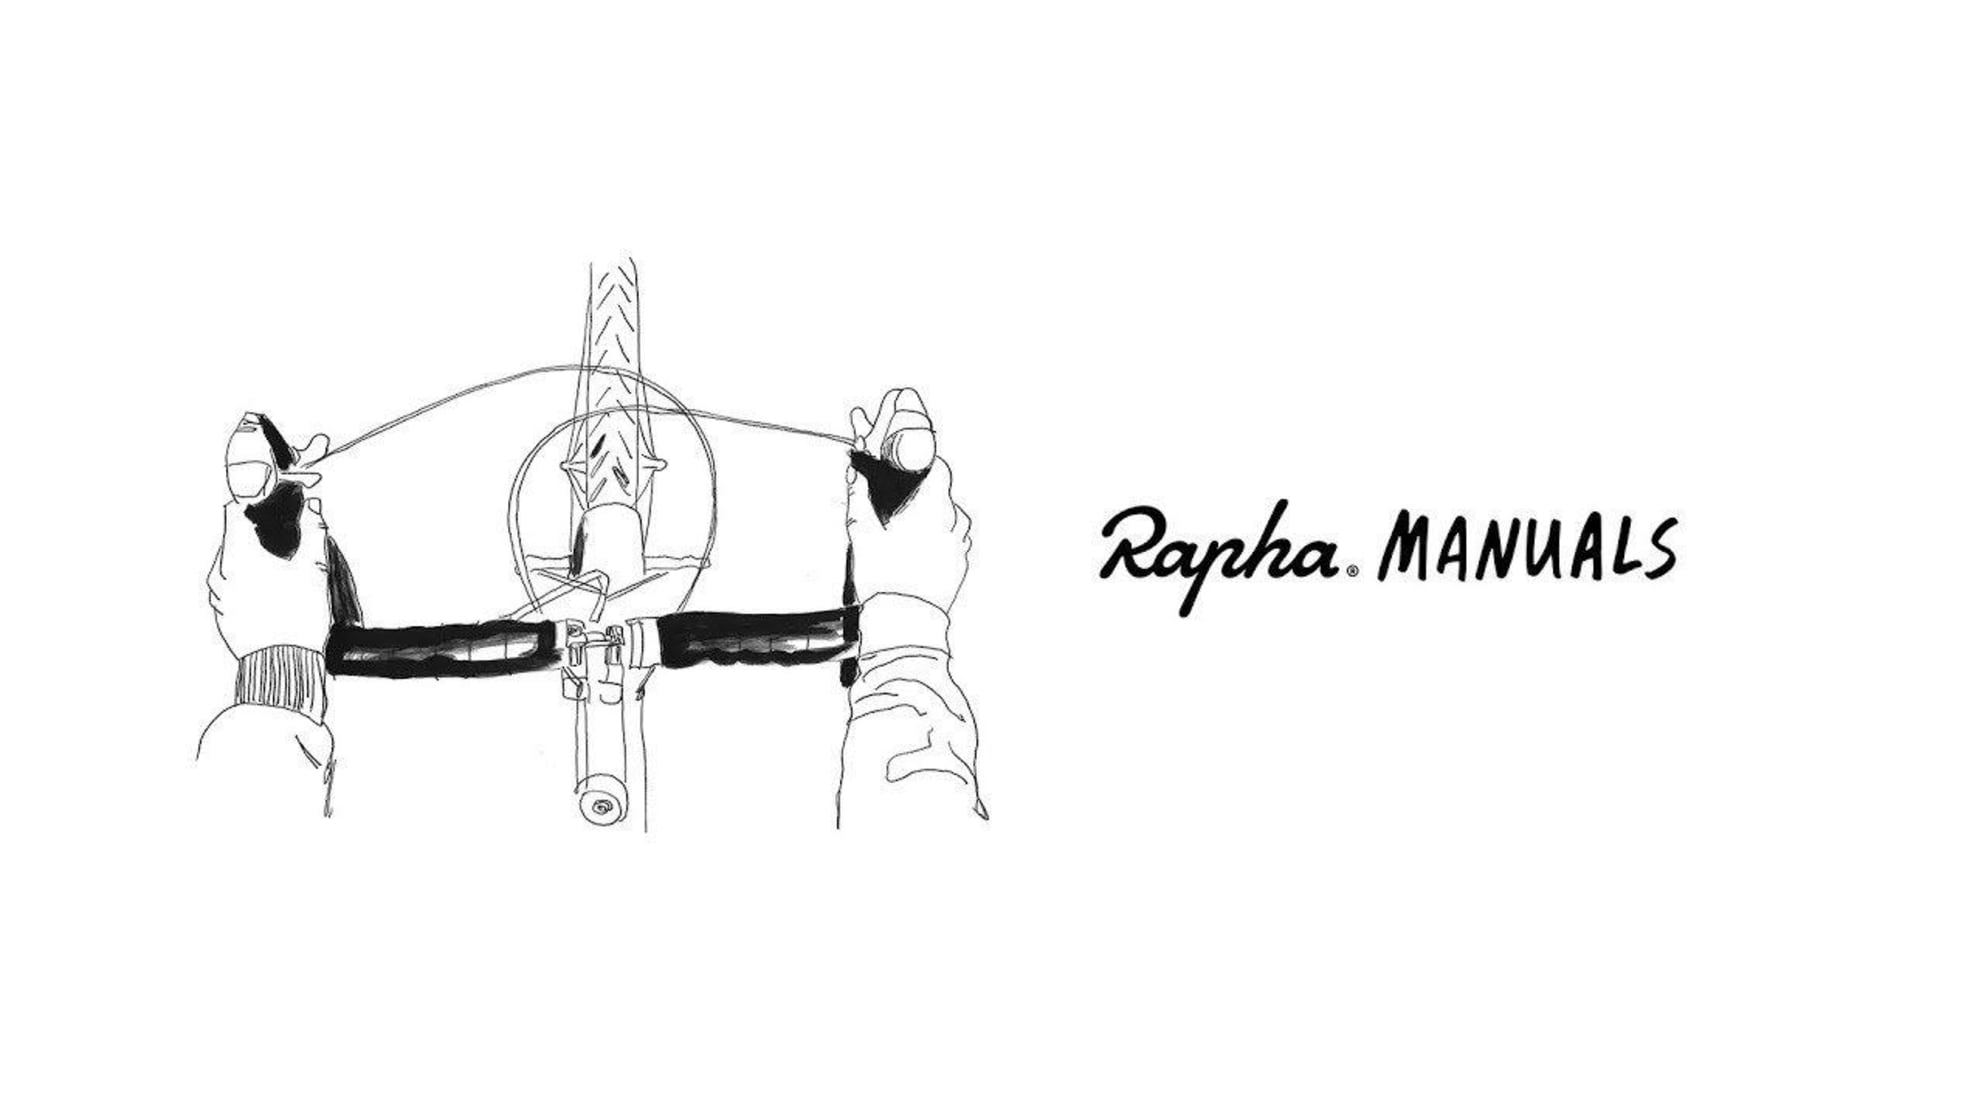 Rapha Manuals: We All Need A Finish Line